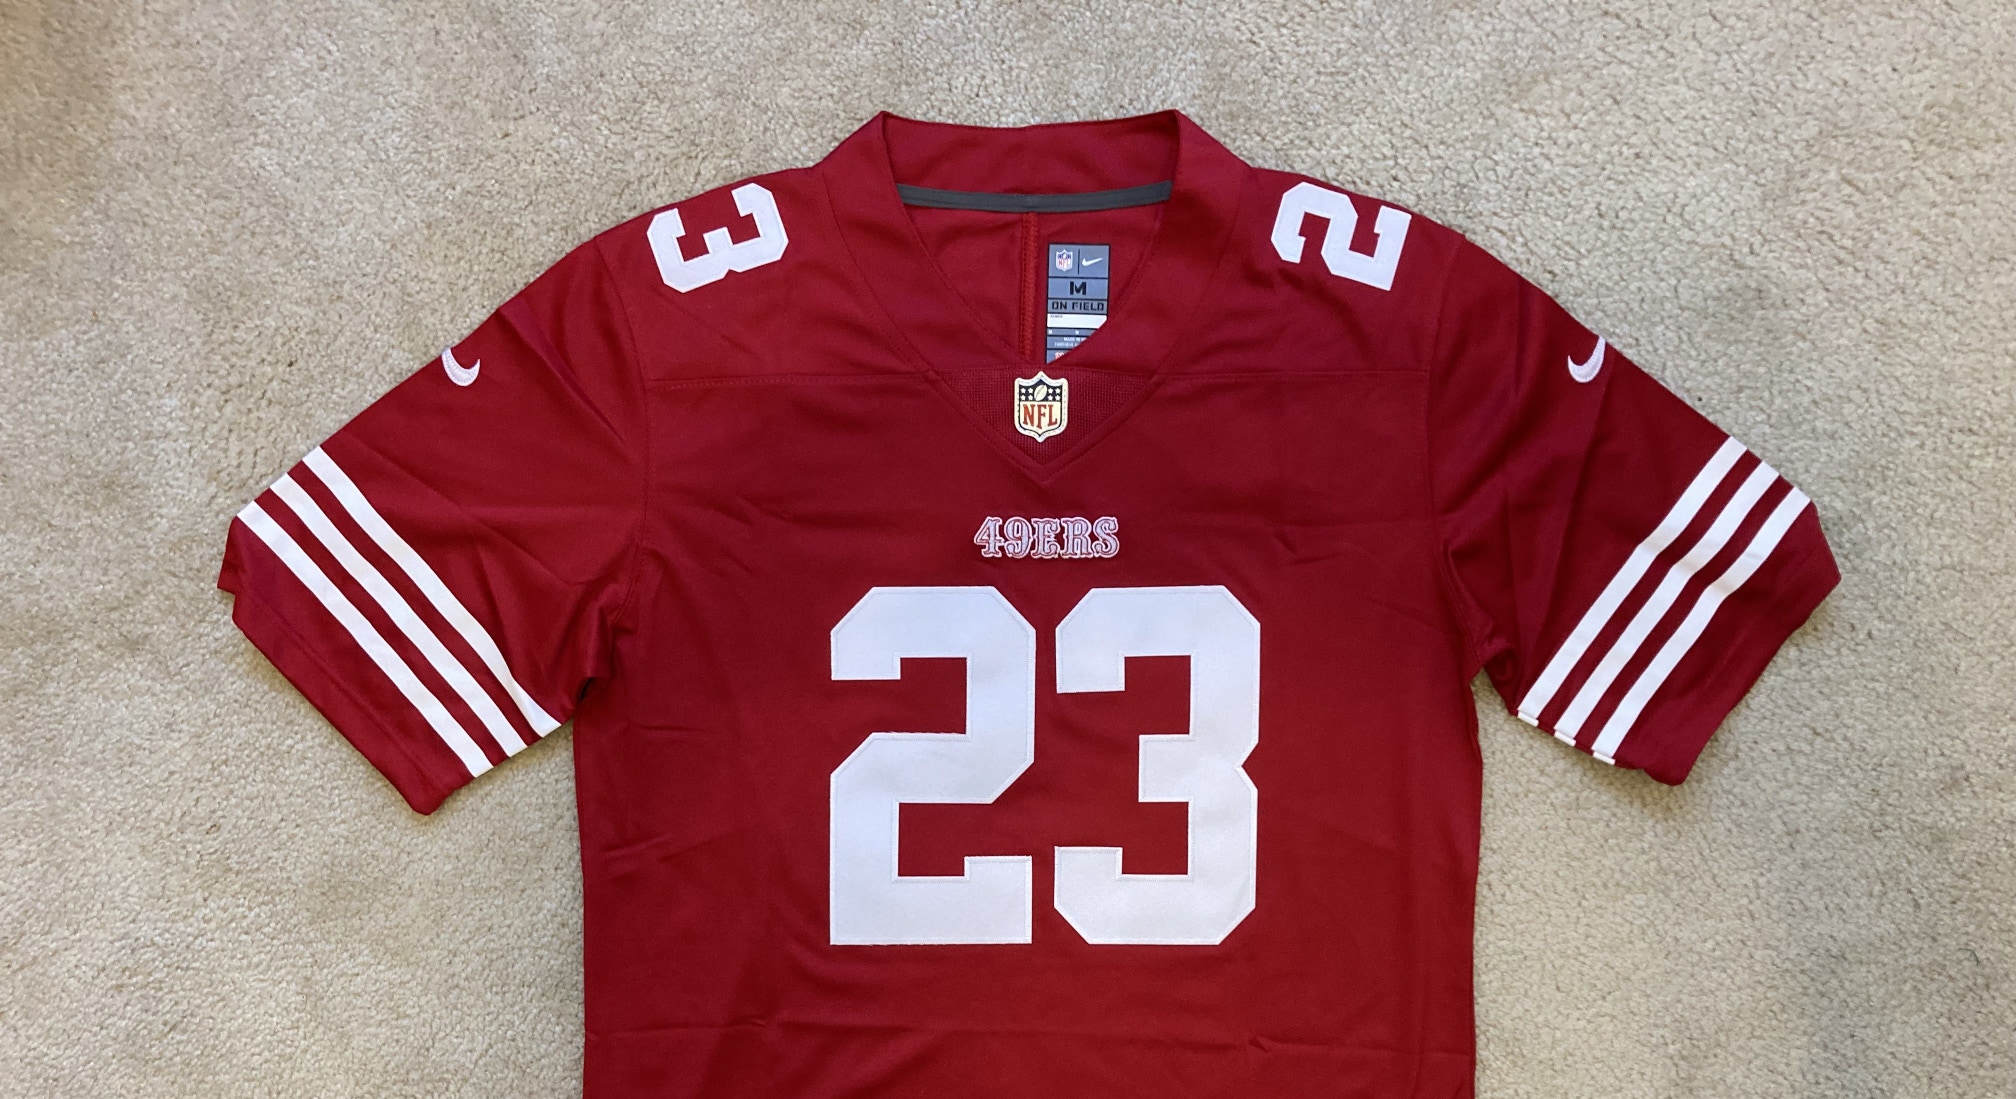 Christian McCaffrey 49ers jersey one of NFL's best sellers